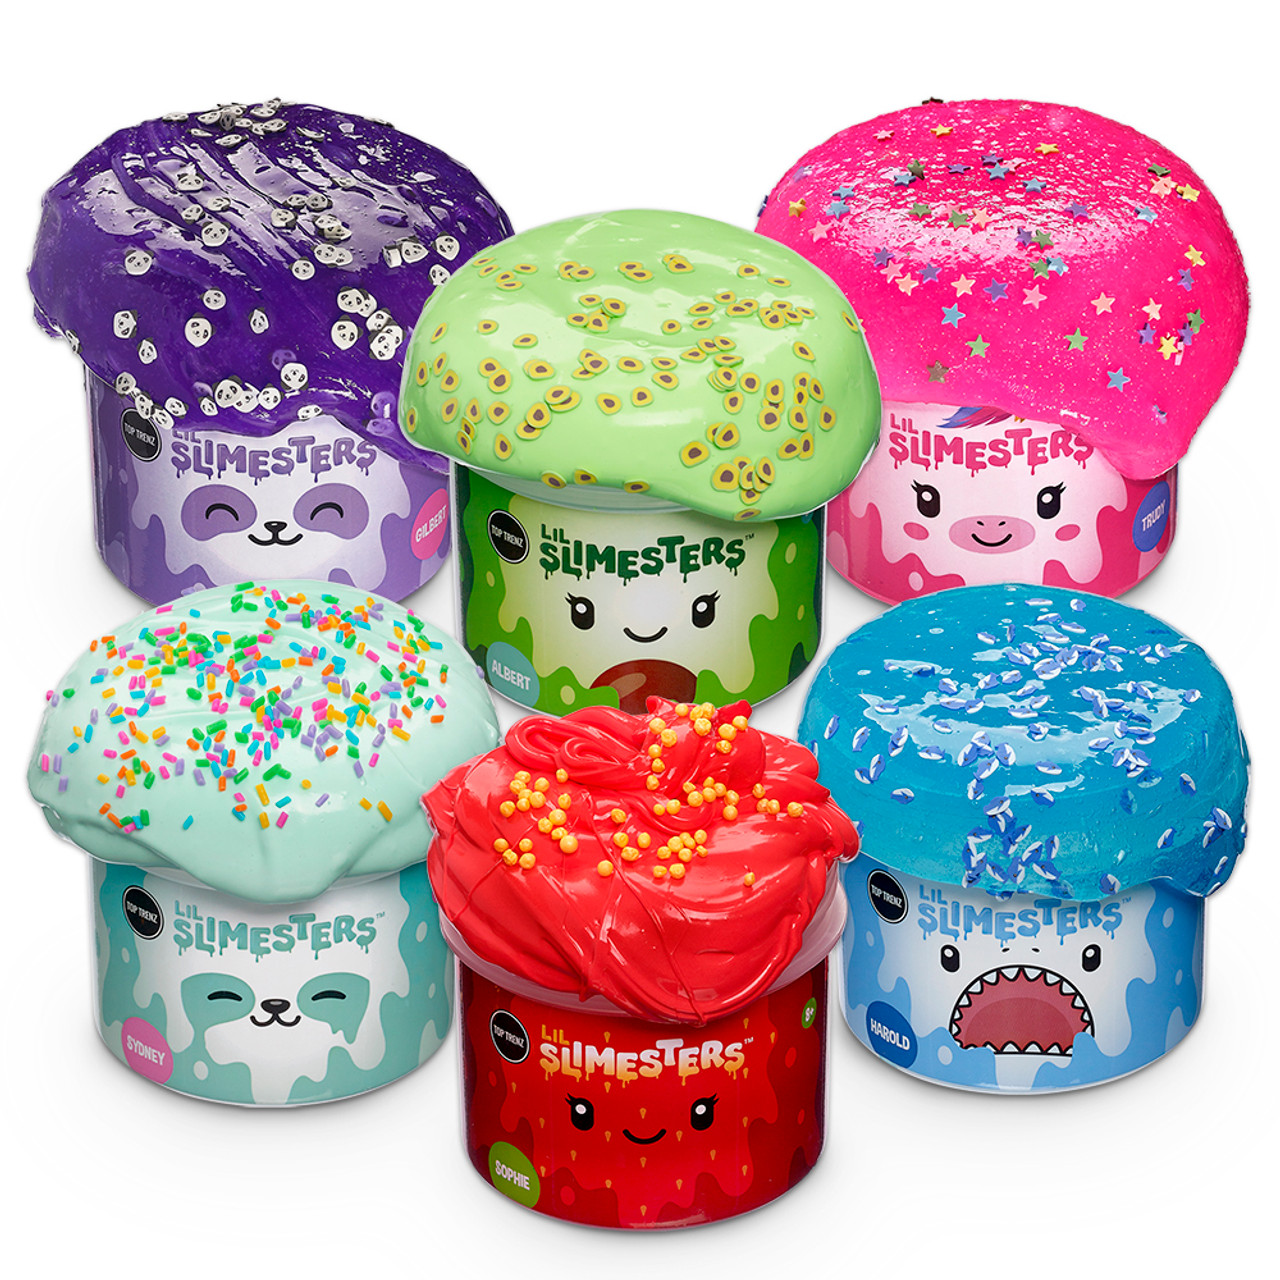 Lil' Slimester Trudy - Jelly Sparkle Slime with Star Fimo mix-ins